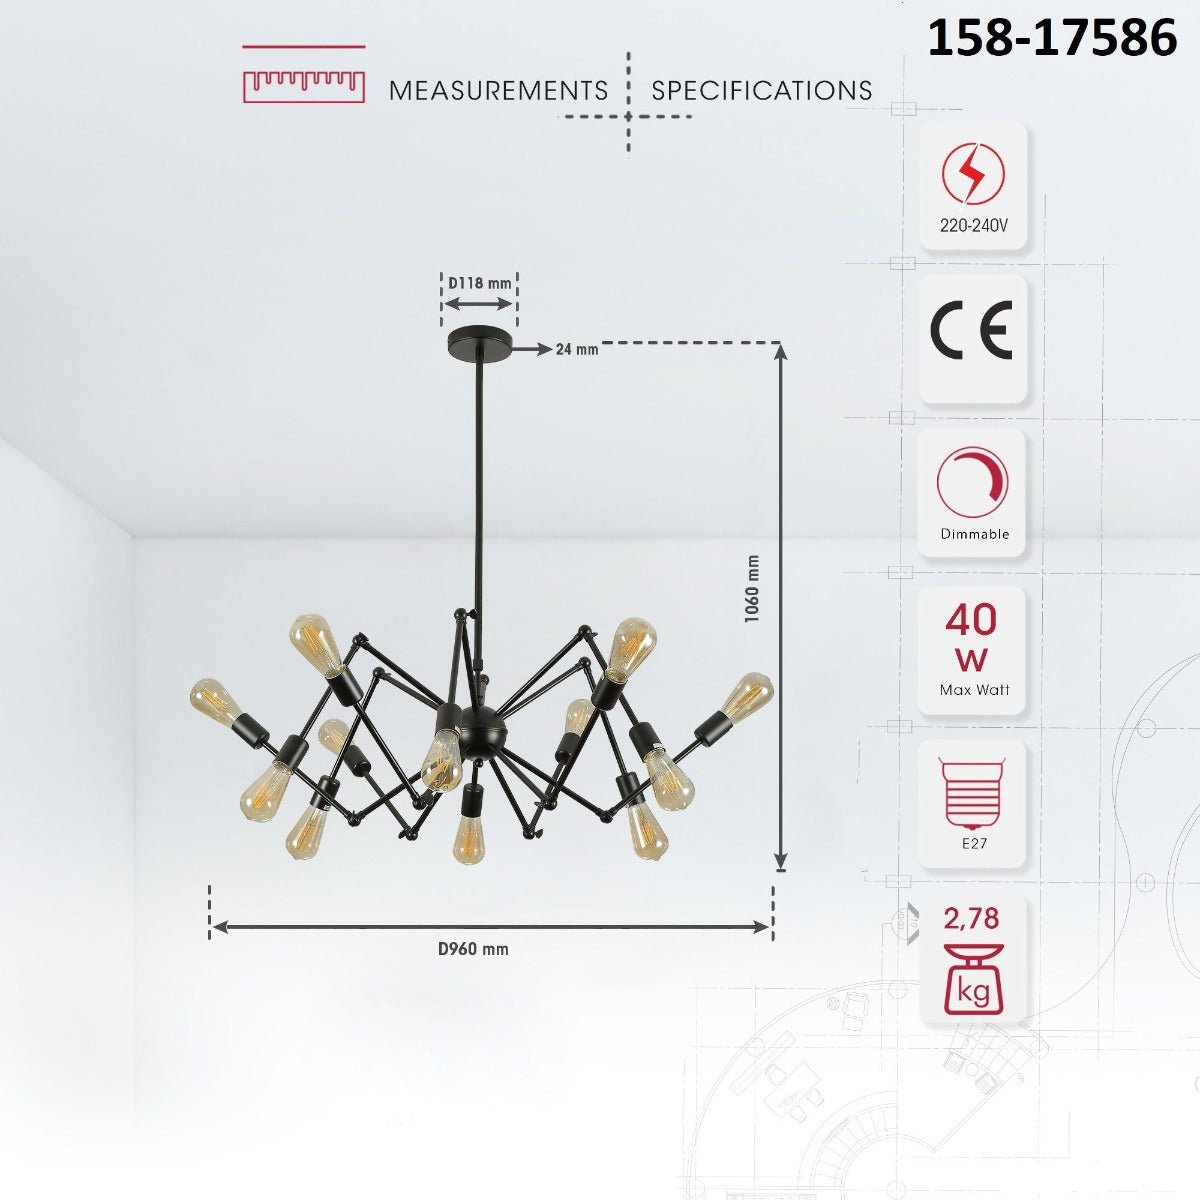 Product dimensions of black hinged rod metal spider chandelier with 12xe27 fitting 158-17586